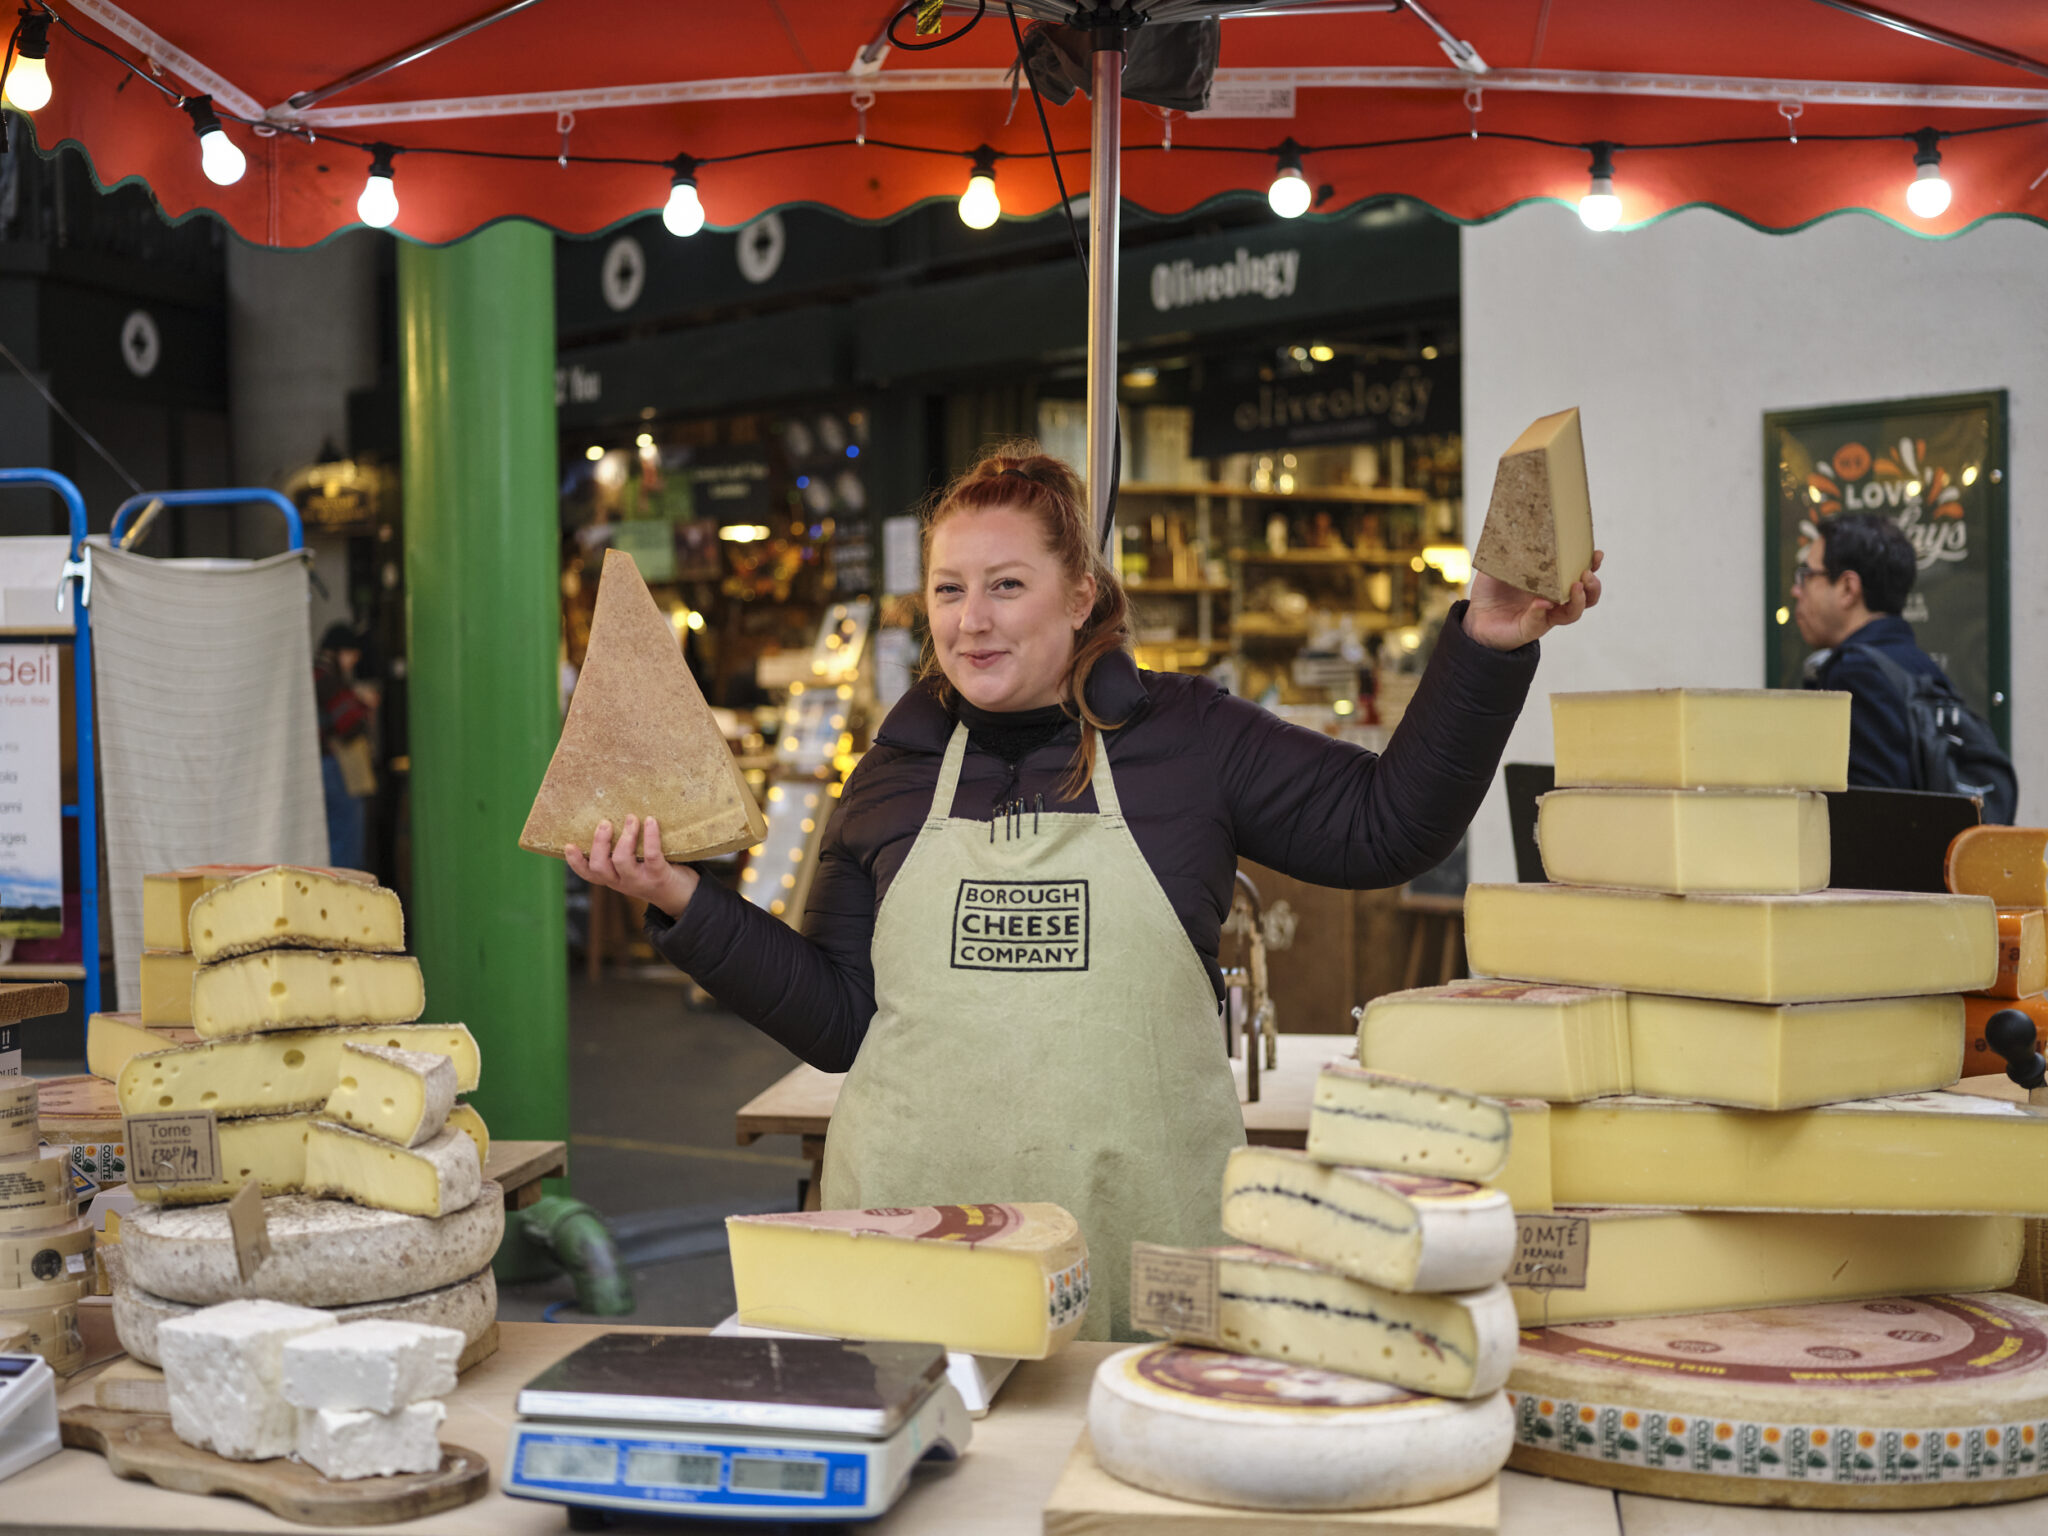 Borough Cheese – Hand-selected cheese in London